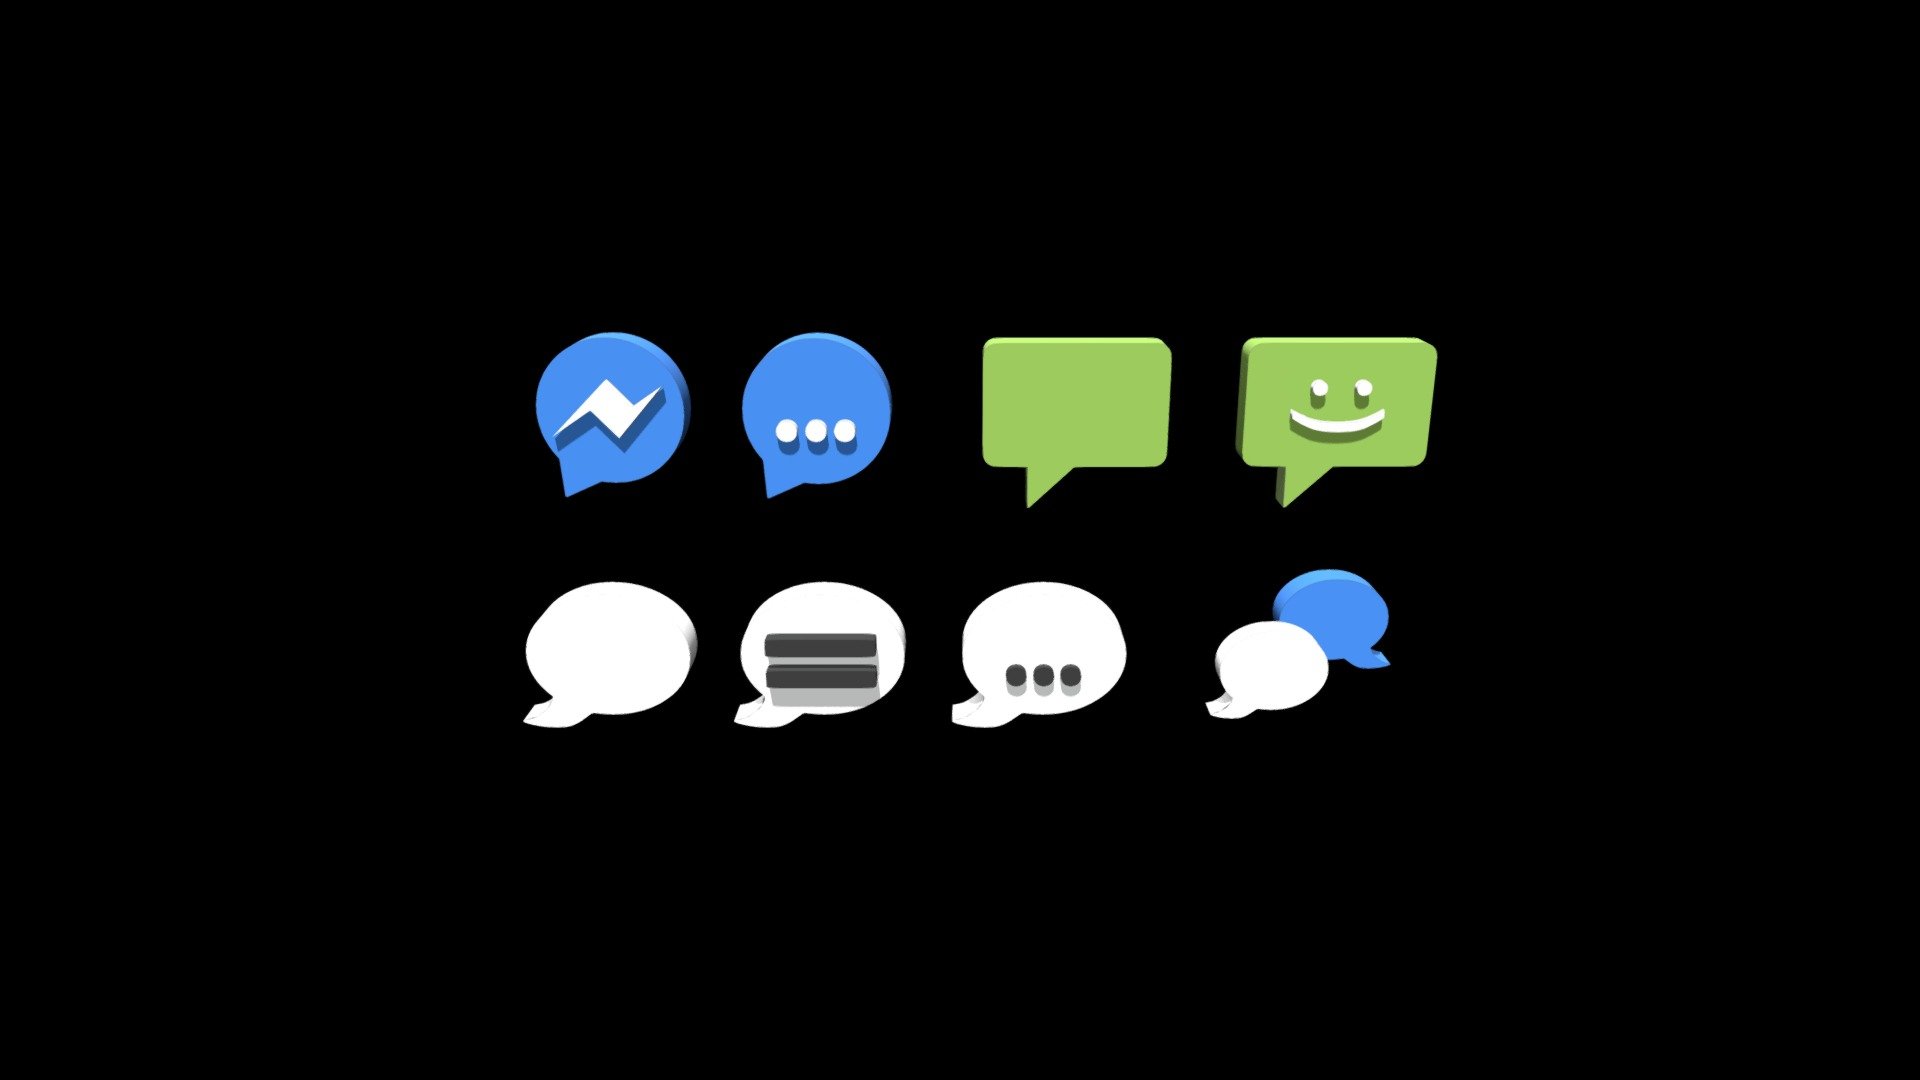 3D icons
Messange/ FB messanger/ SMS - 3D icons messanger - Download Free 3D model by Sparrow (@innasparrow) 3d model